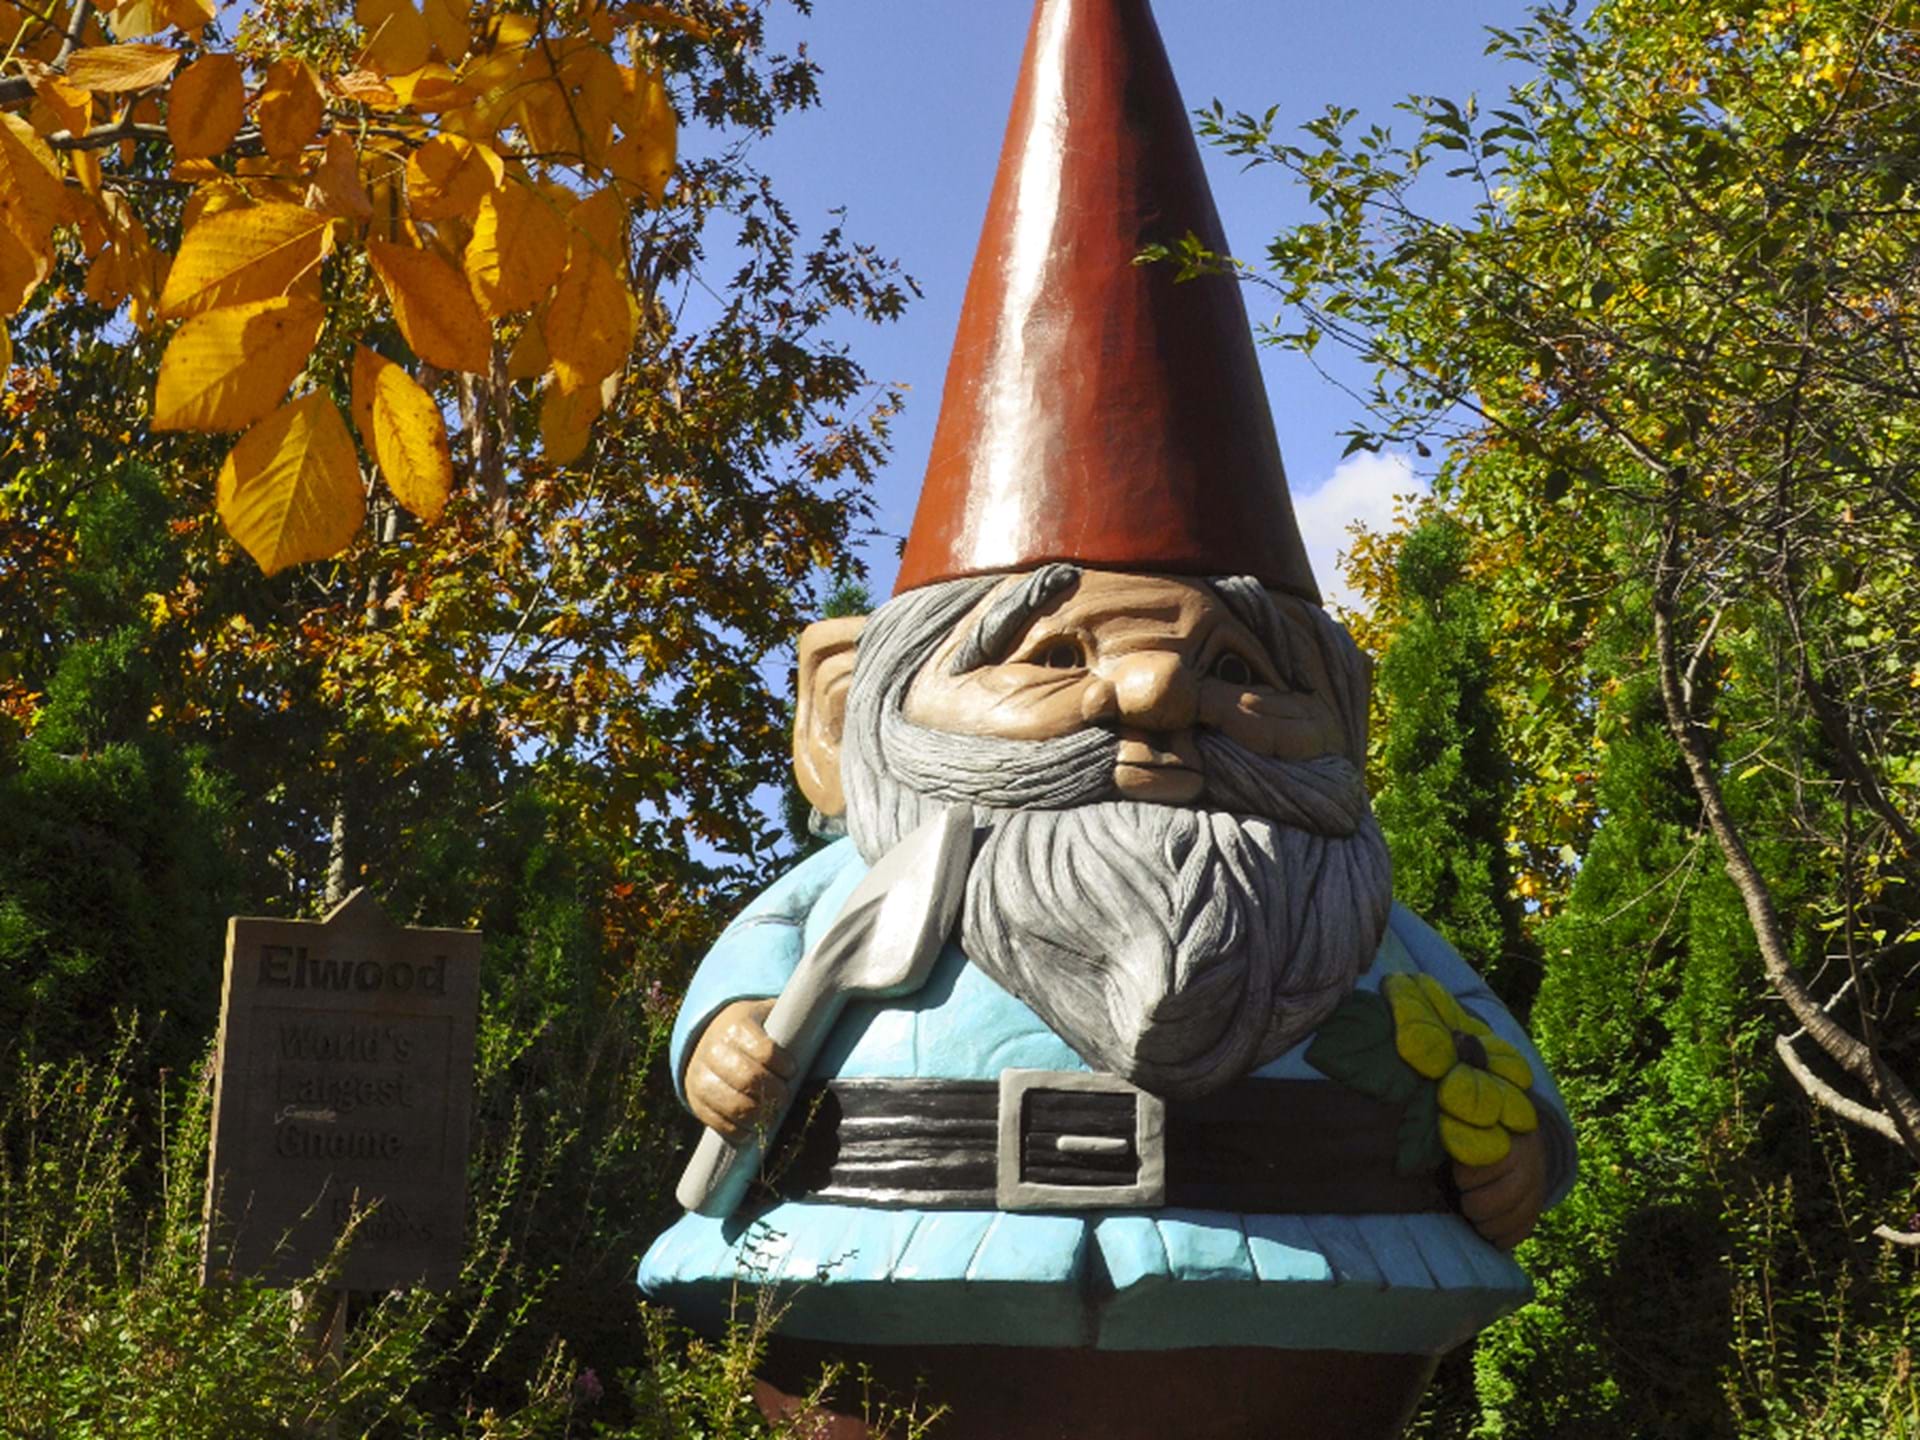 Elwood the worlds tallest gnome